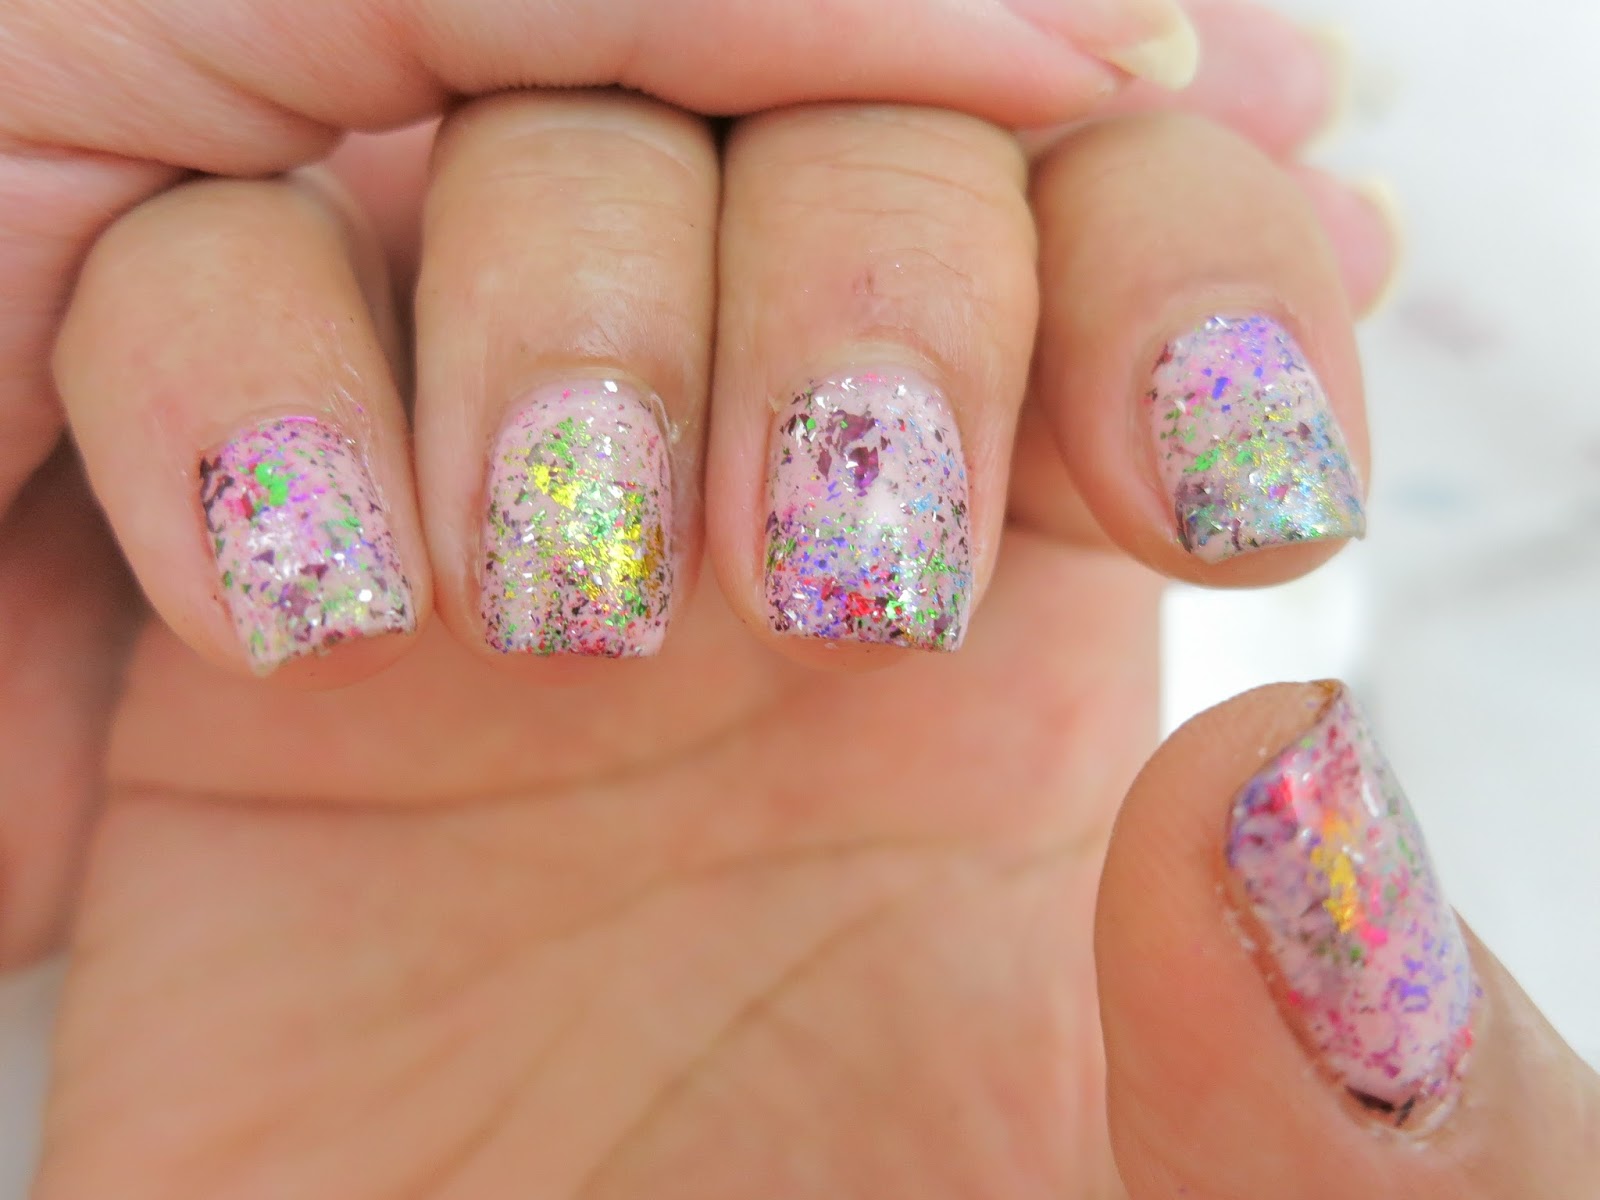 2. Pink Glitter Nails with Gold Foil Nail Art - wide 7